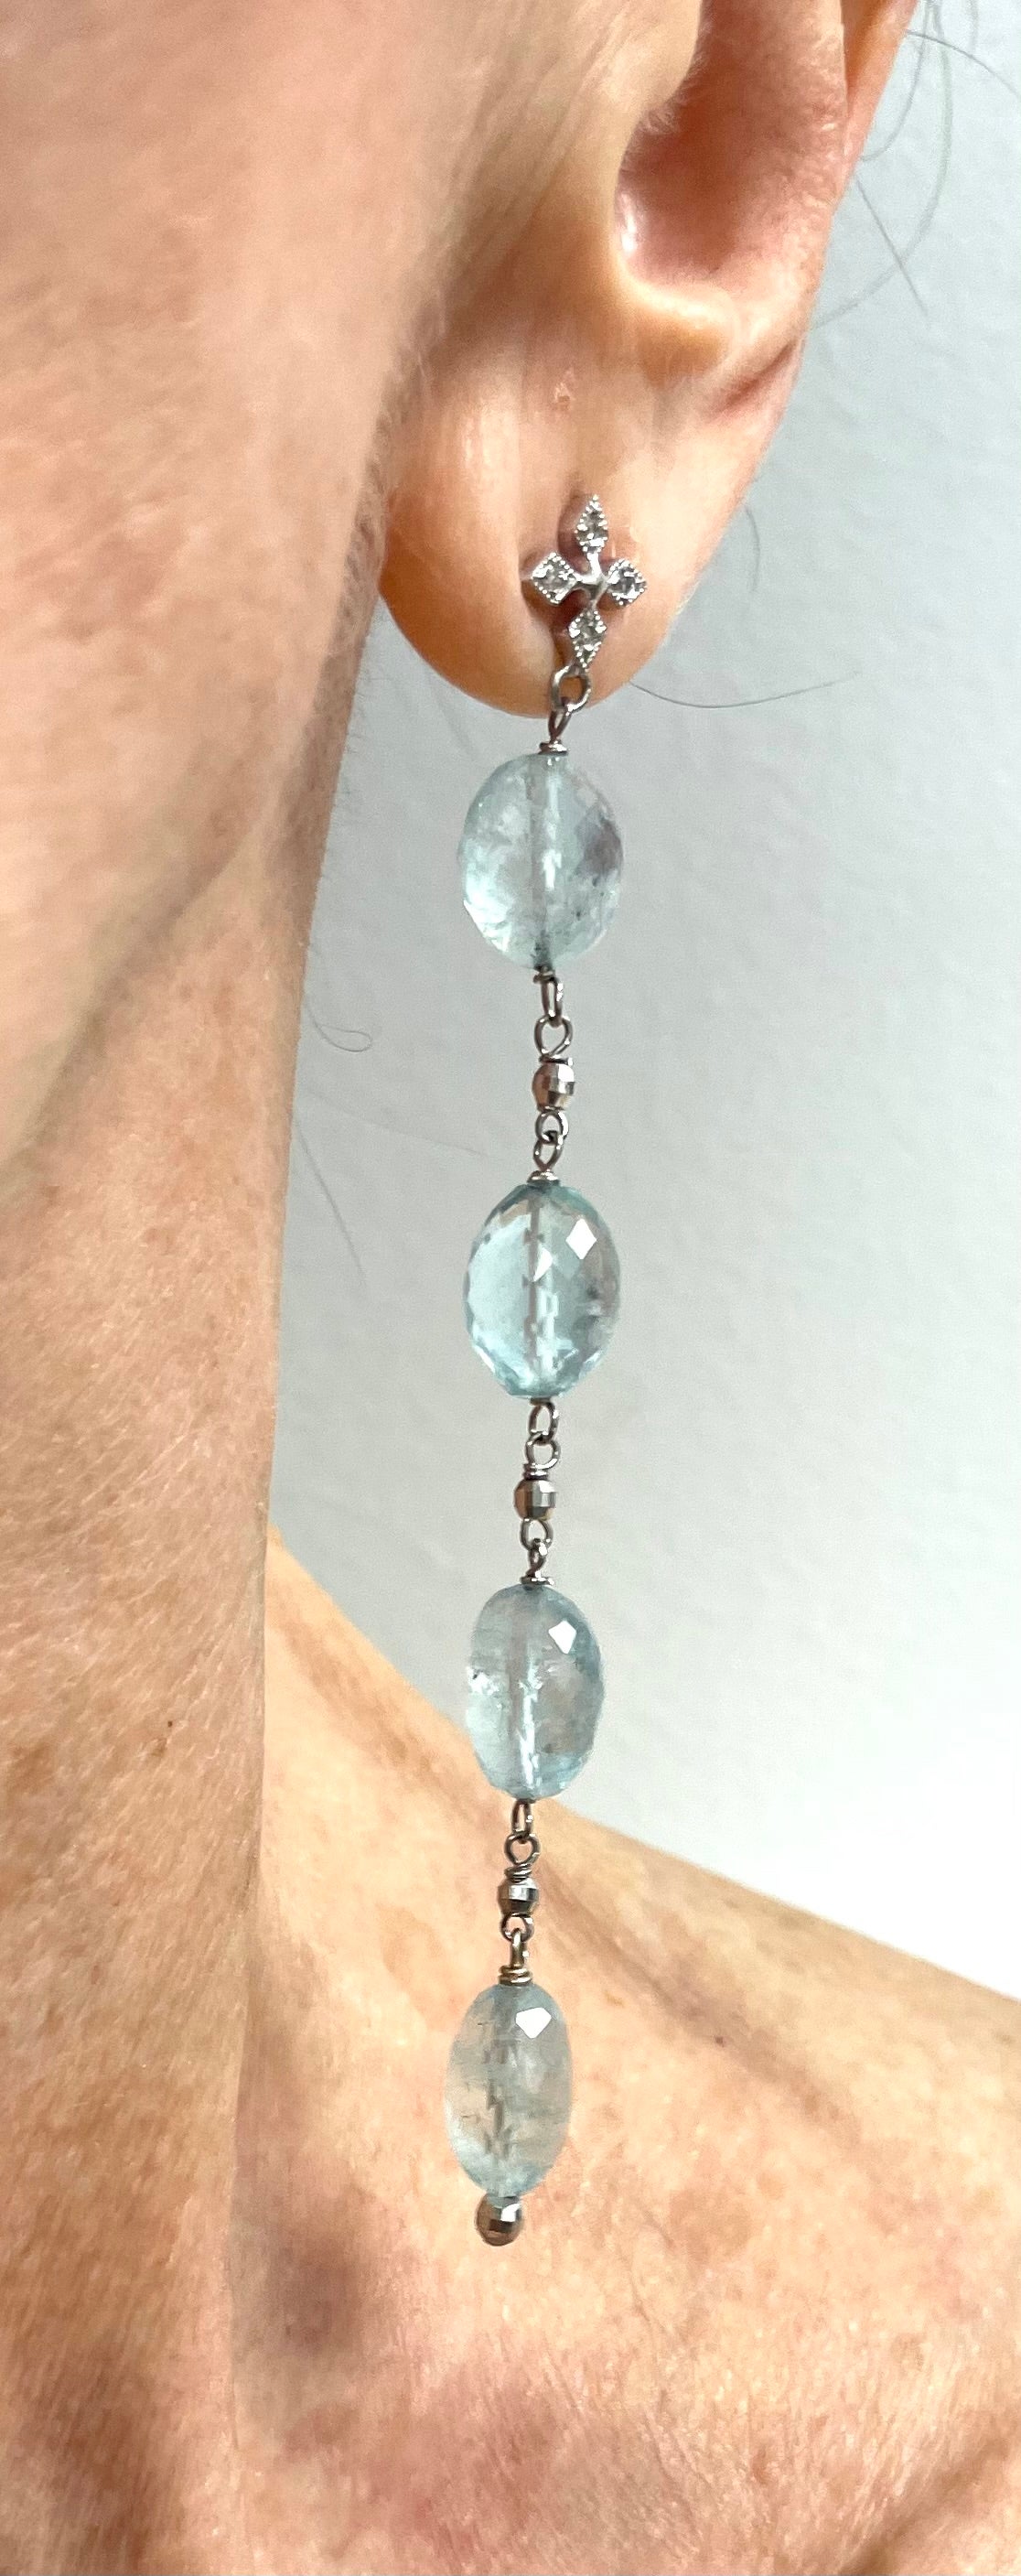 Description
Beautiful, calming Aquamarine individually wire wrapped suspended from pave diamond ear posts and accented with small white gold faceted balls to create a harmonious feminine style. 
Item # E3350
Check out matching necklace Item # N3750,